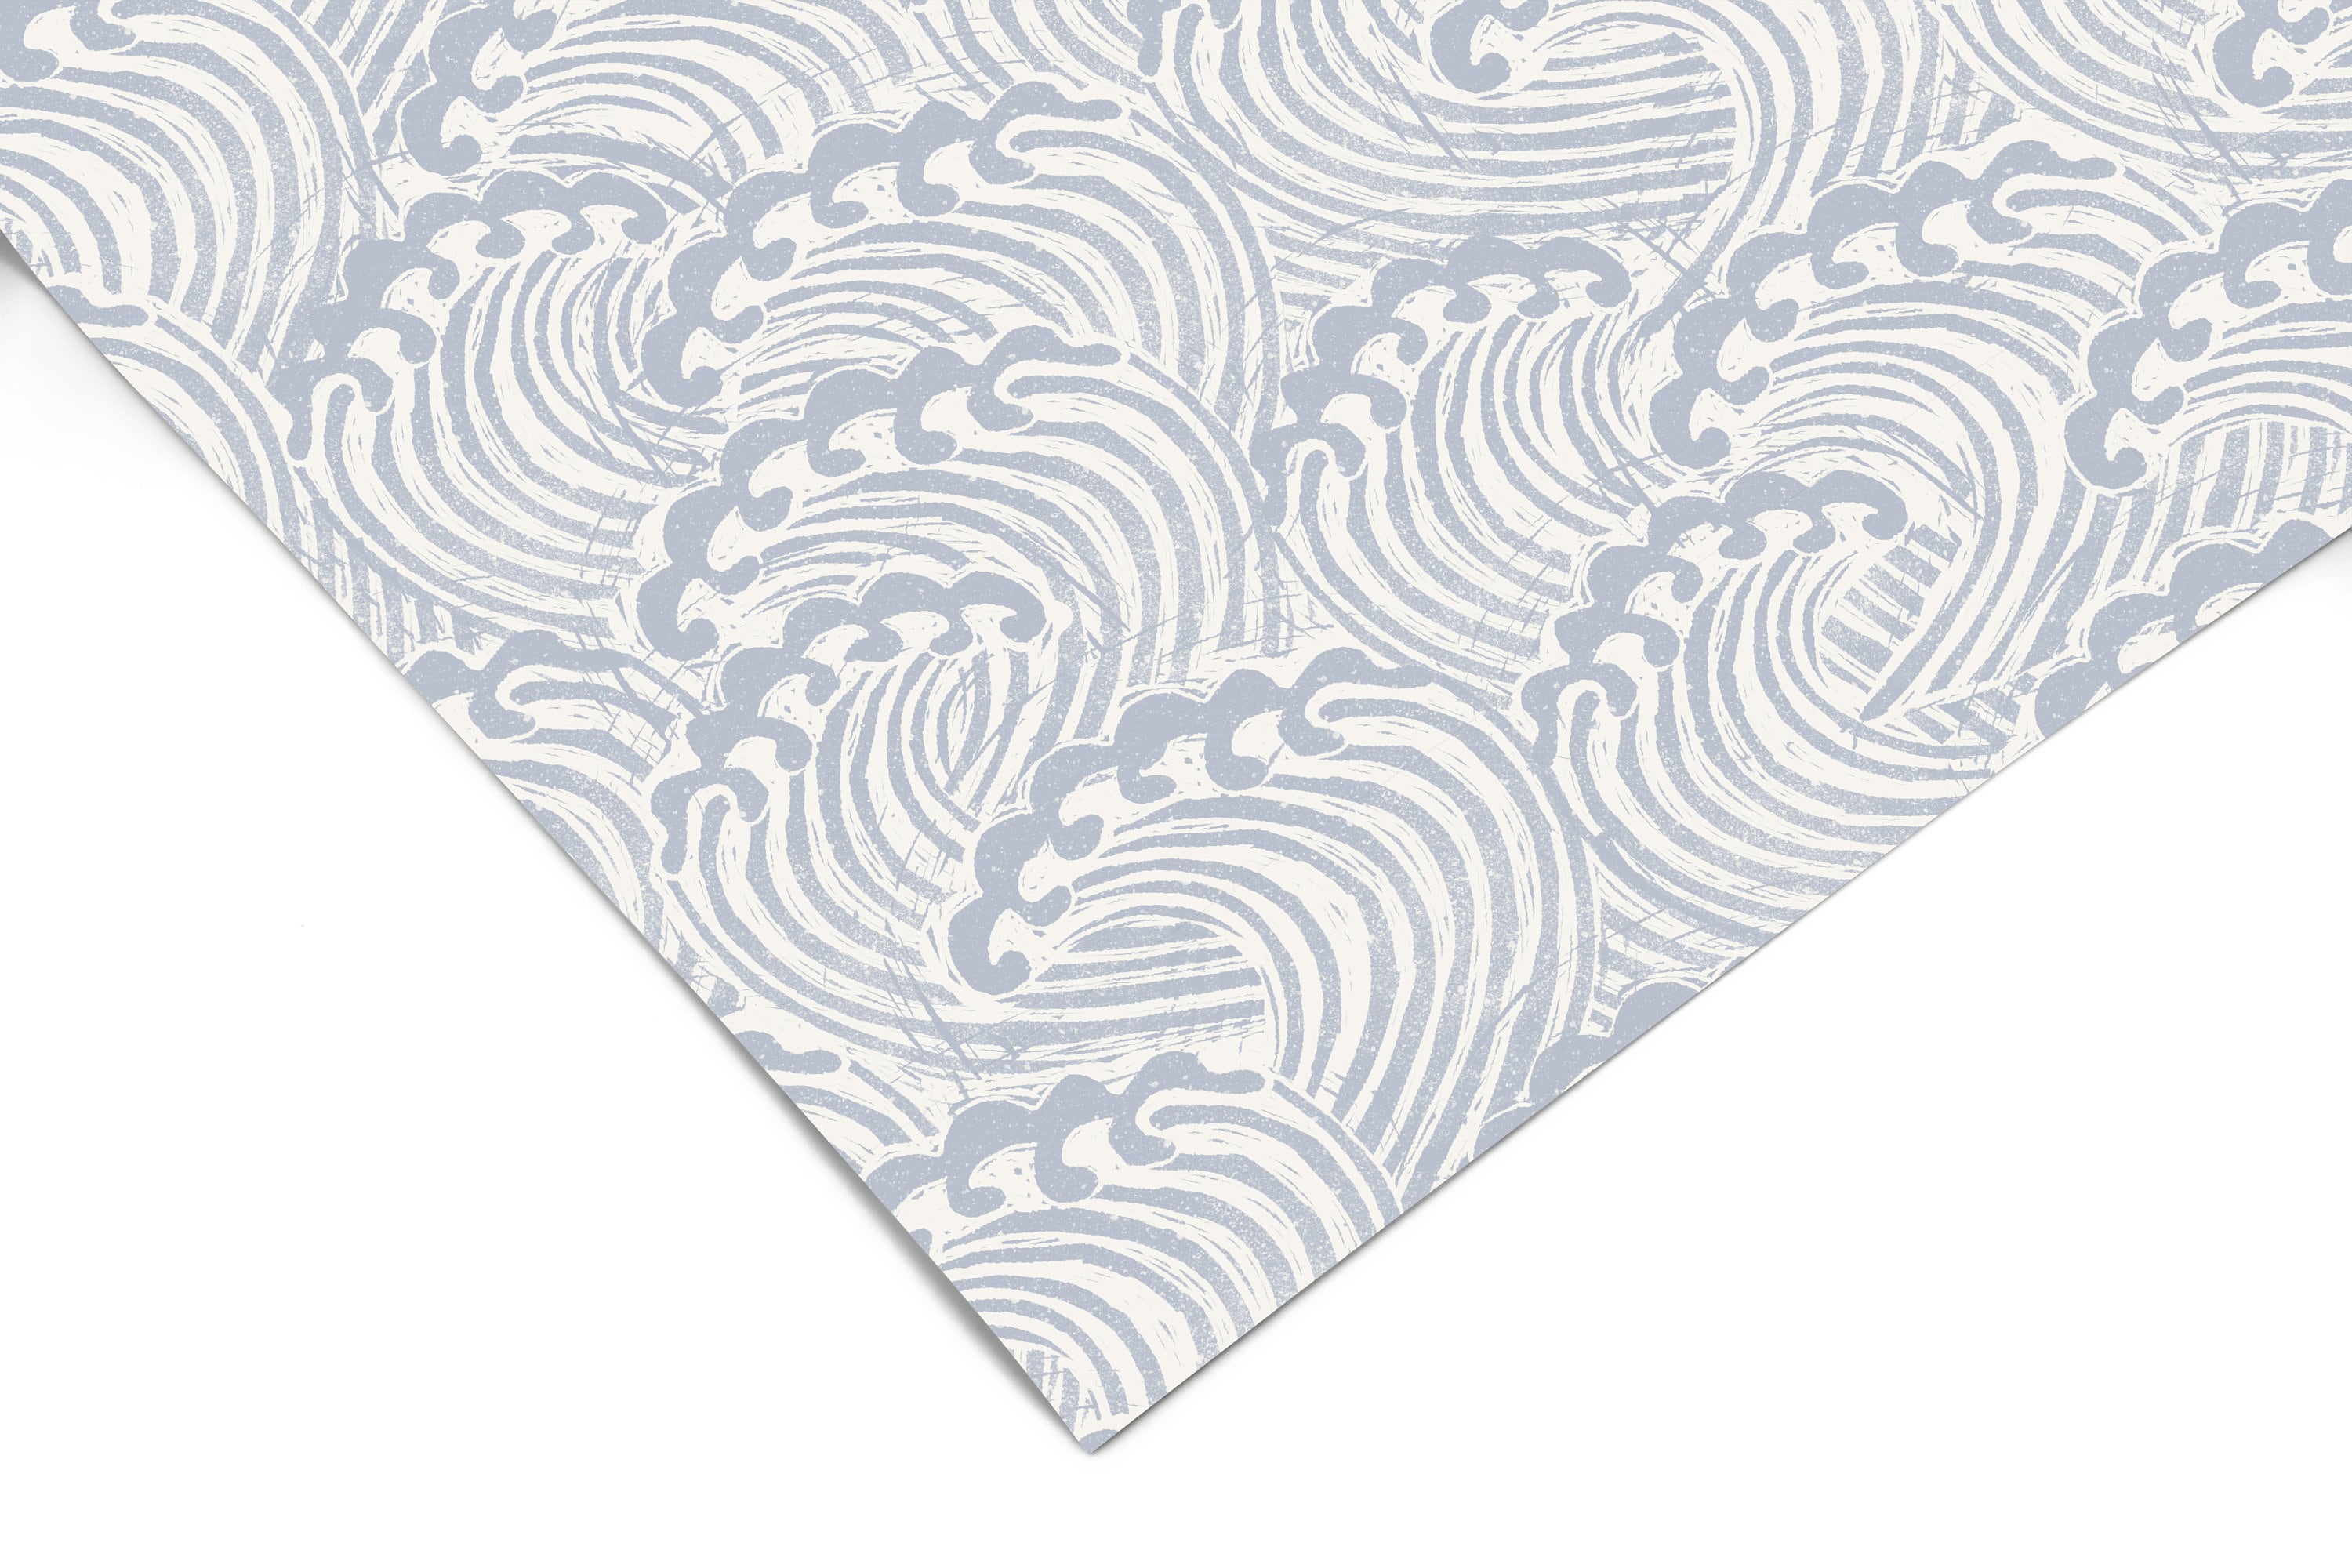 Muted Crashing Waves Contact Paper | Peel And Stick Wallpaper | Removable Wallpaper | Shelf Liner | Drawer Liner | Peel and Stick Paper 1087 - JamesAndColors